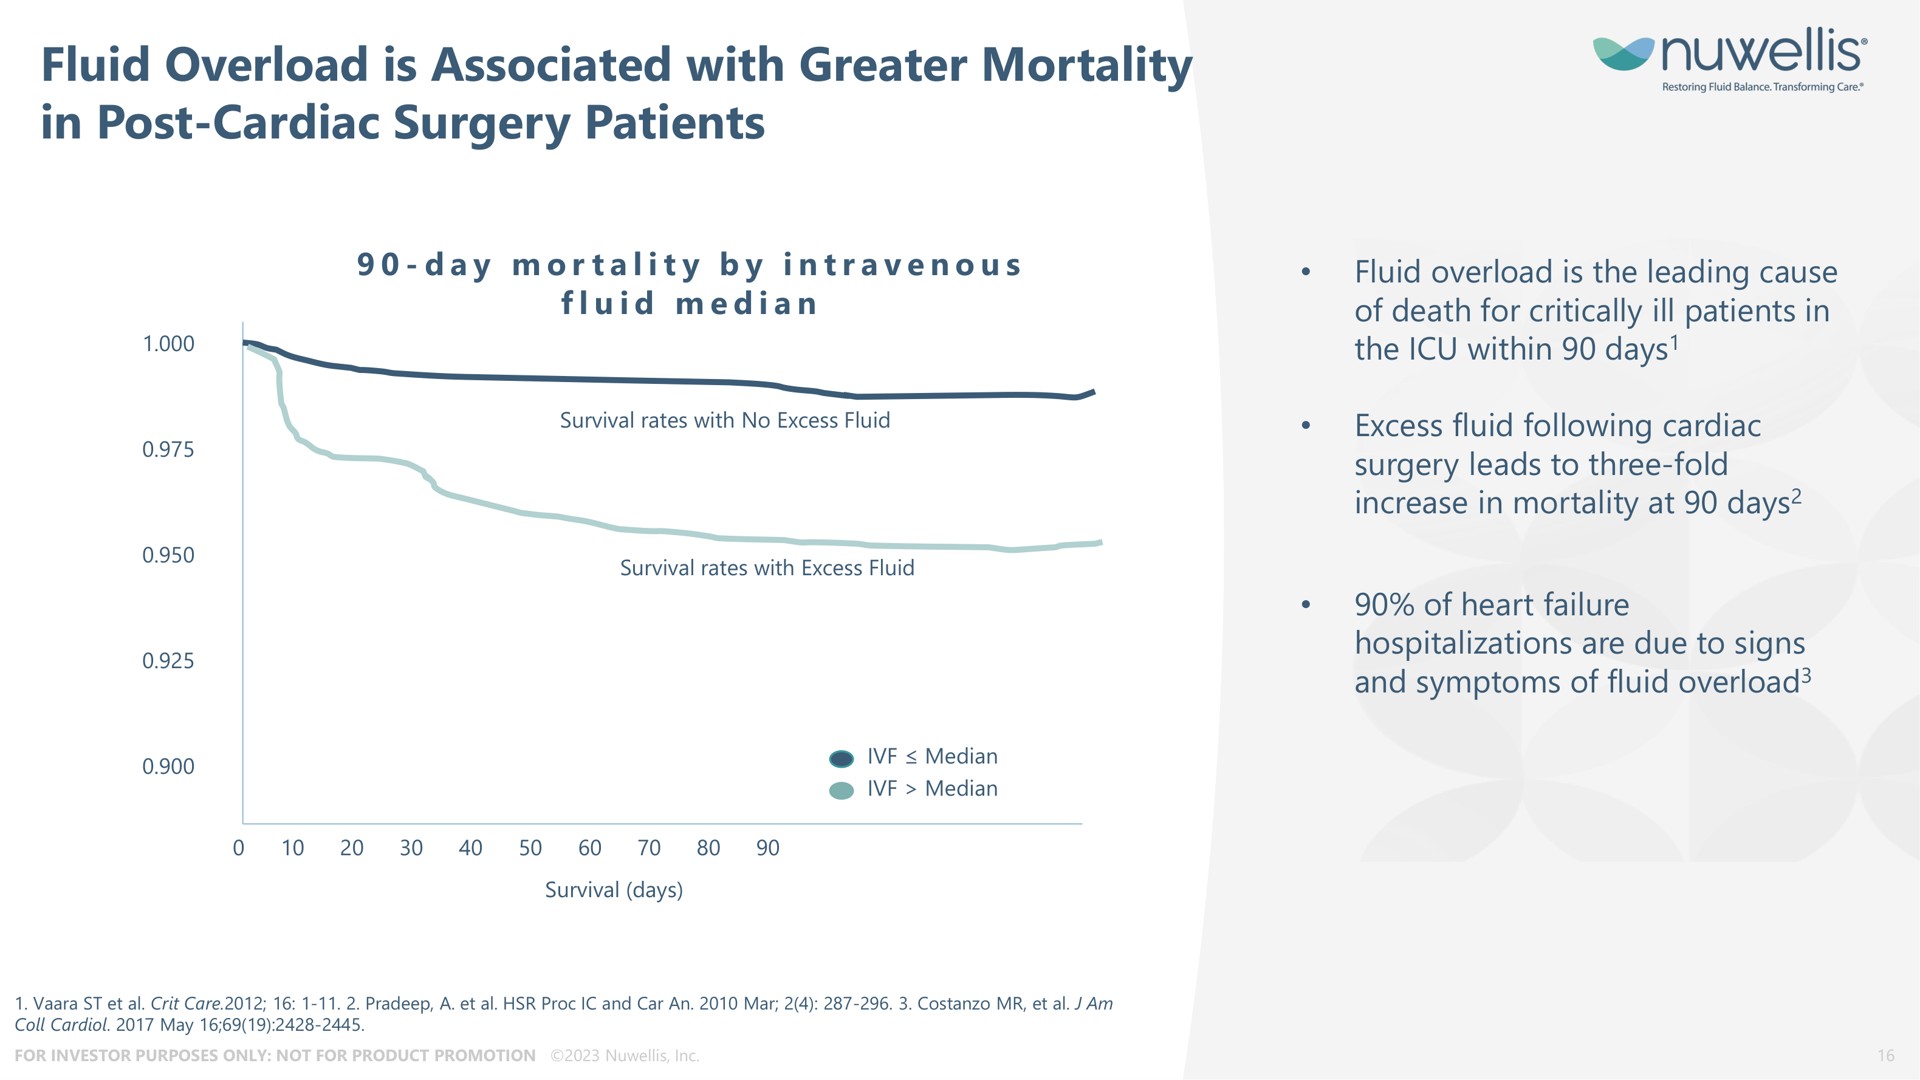 fluid overload is associated with greater mortality in post cardiac surgery patients | Nuwellis